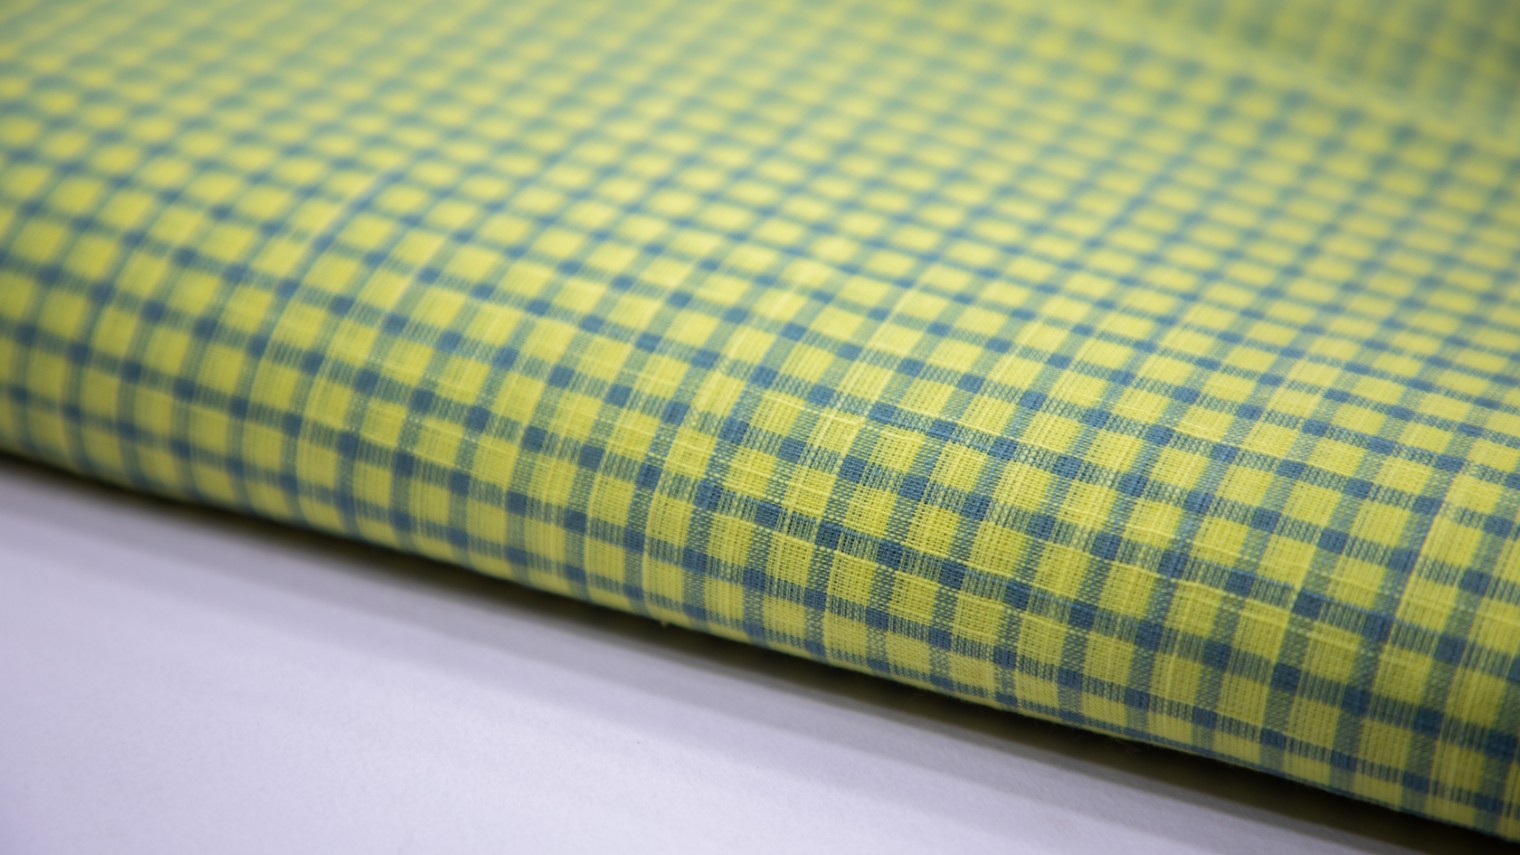 PASTEL LIME YELLOW COLOR SOUTH COTTON HANDLOOM BLUE CHEX WEAVE FABRIC - 4216